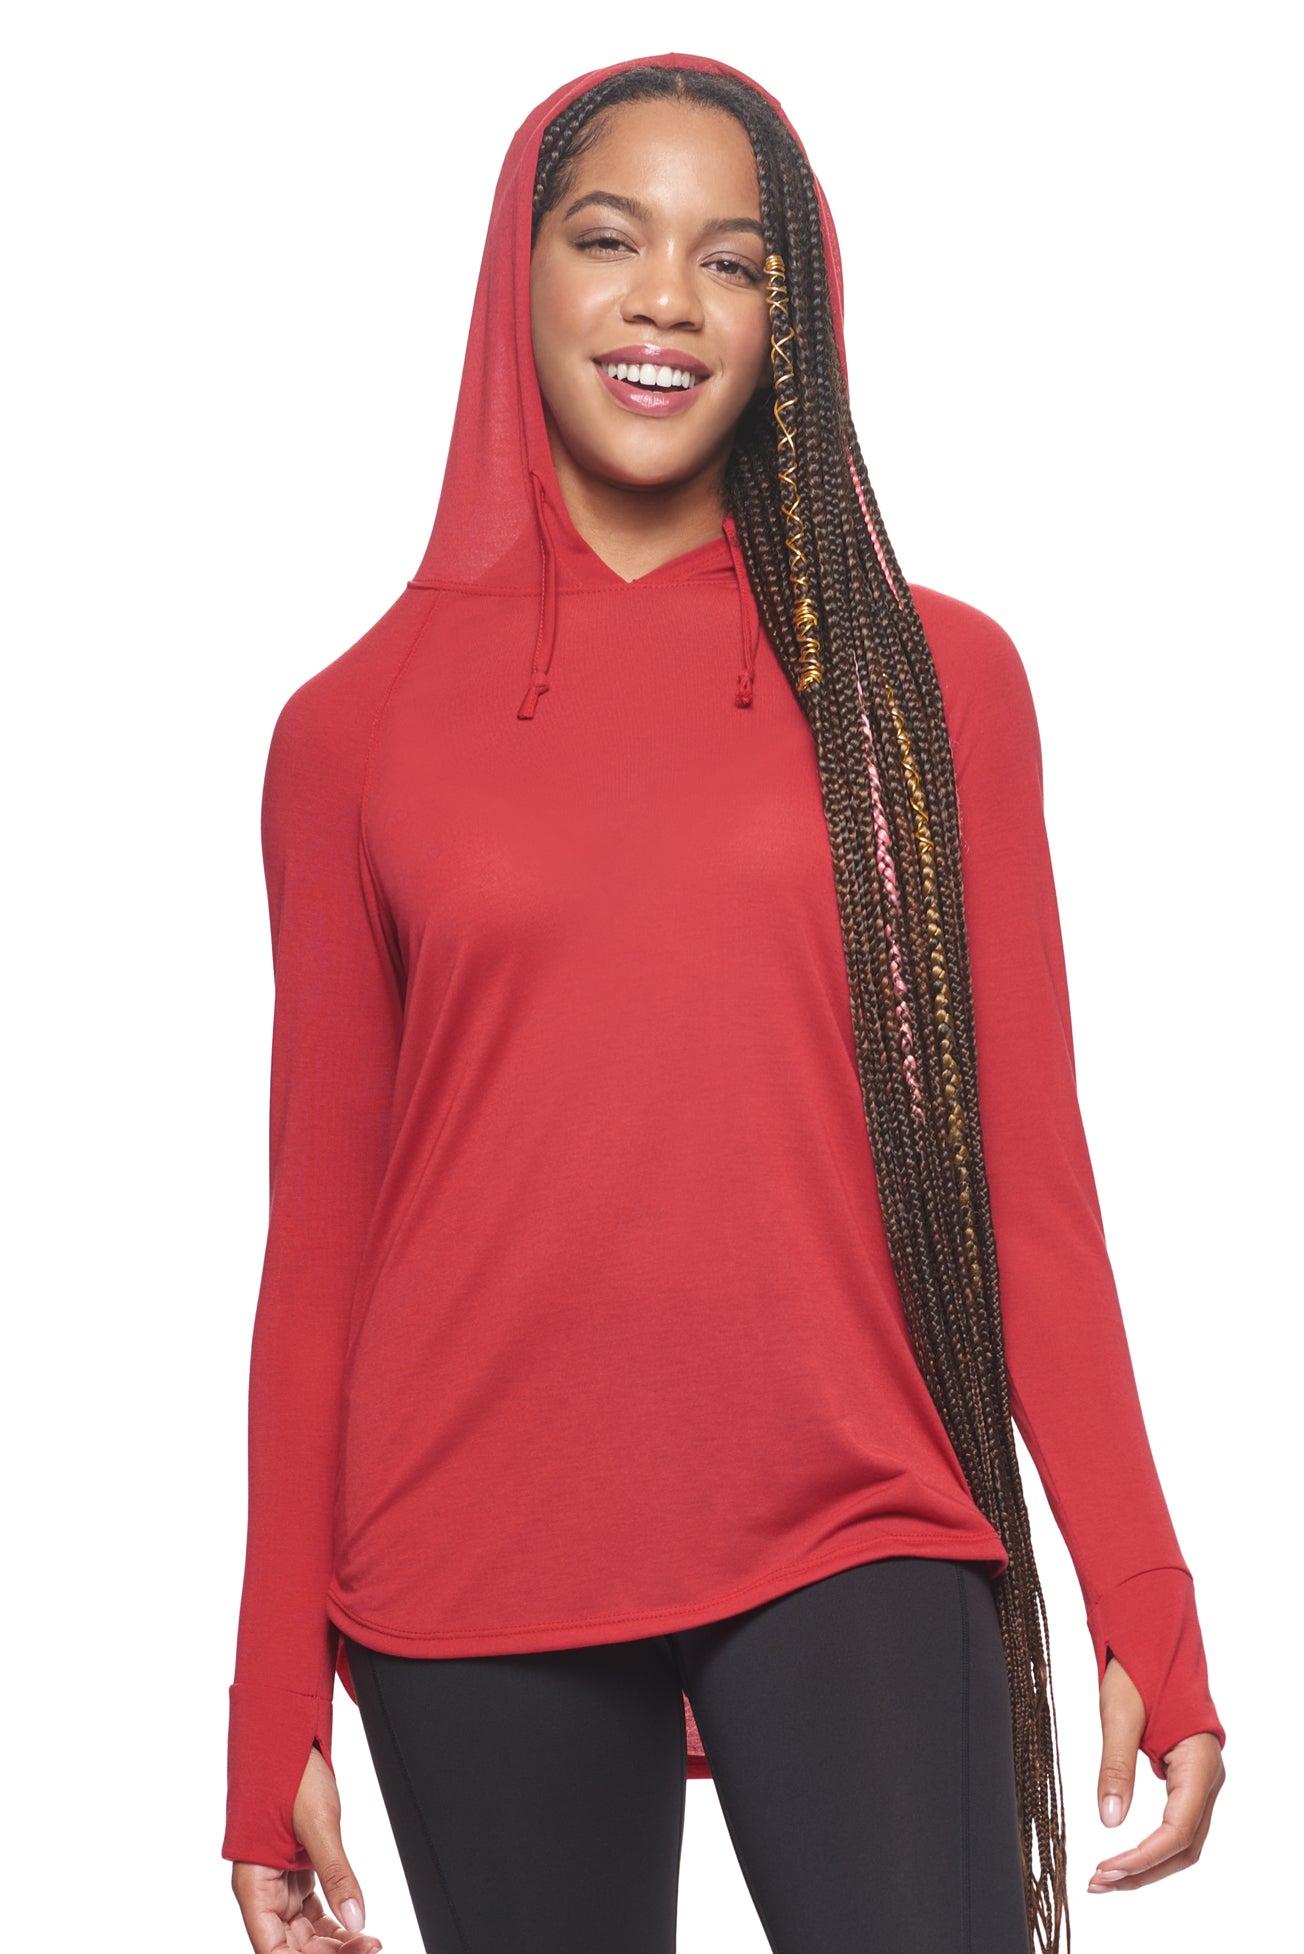 Expert Brand Retail Super Soft Eco-Friendly Performance Apparel Fashion Sportswear Women's Hoodie Long Sleeve Shirt Made in USA scarlet red 2#color_scarlet